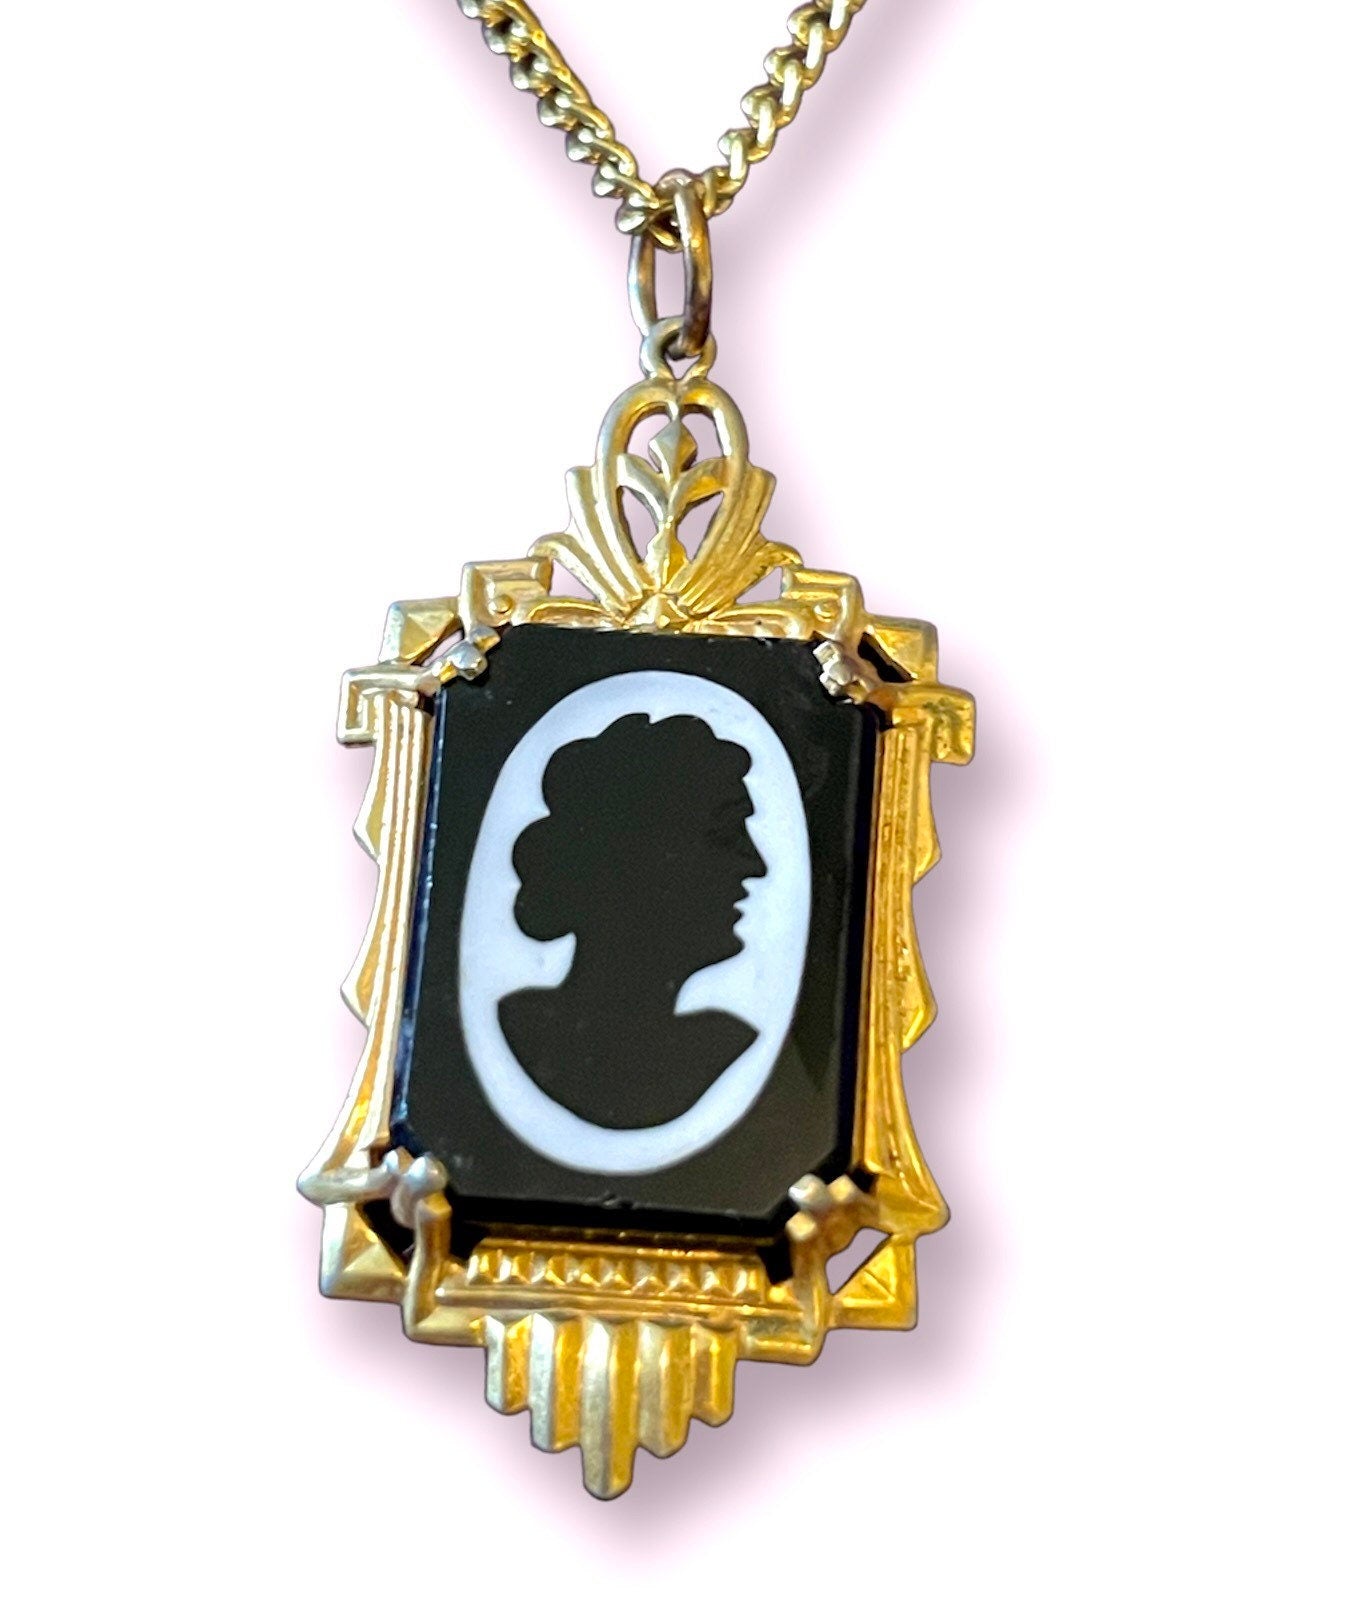 Black & White Glass Shadow Box Silhouette Portrait Cameo Necklace in Gold Art Deco Style Setting